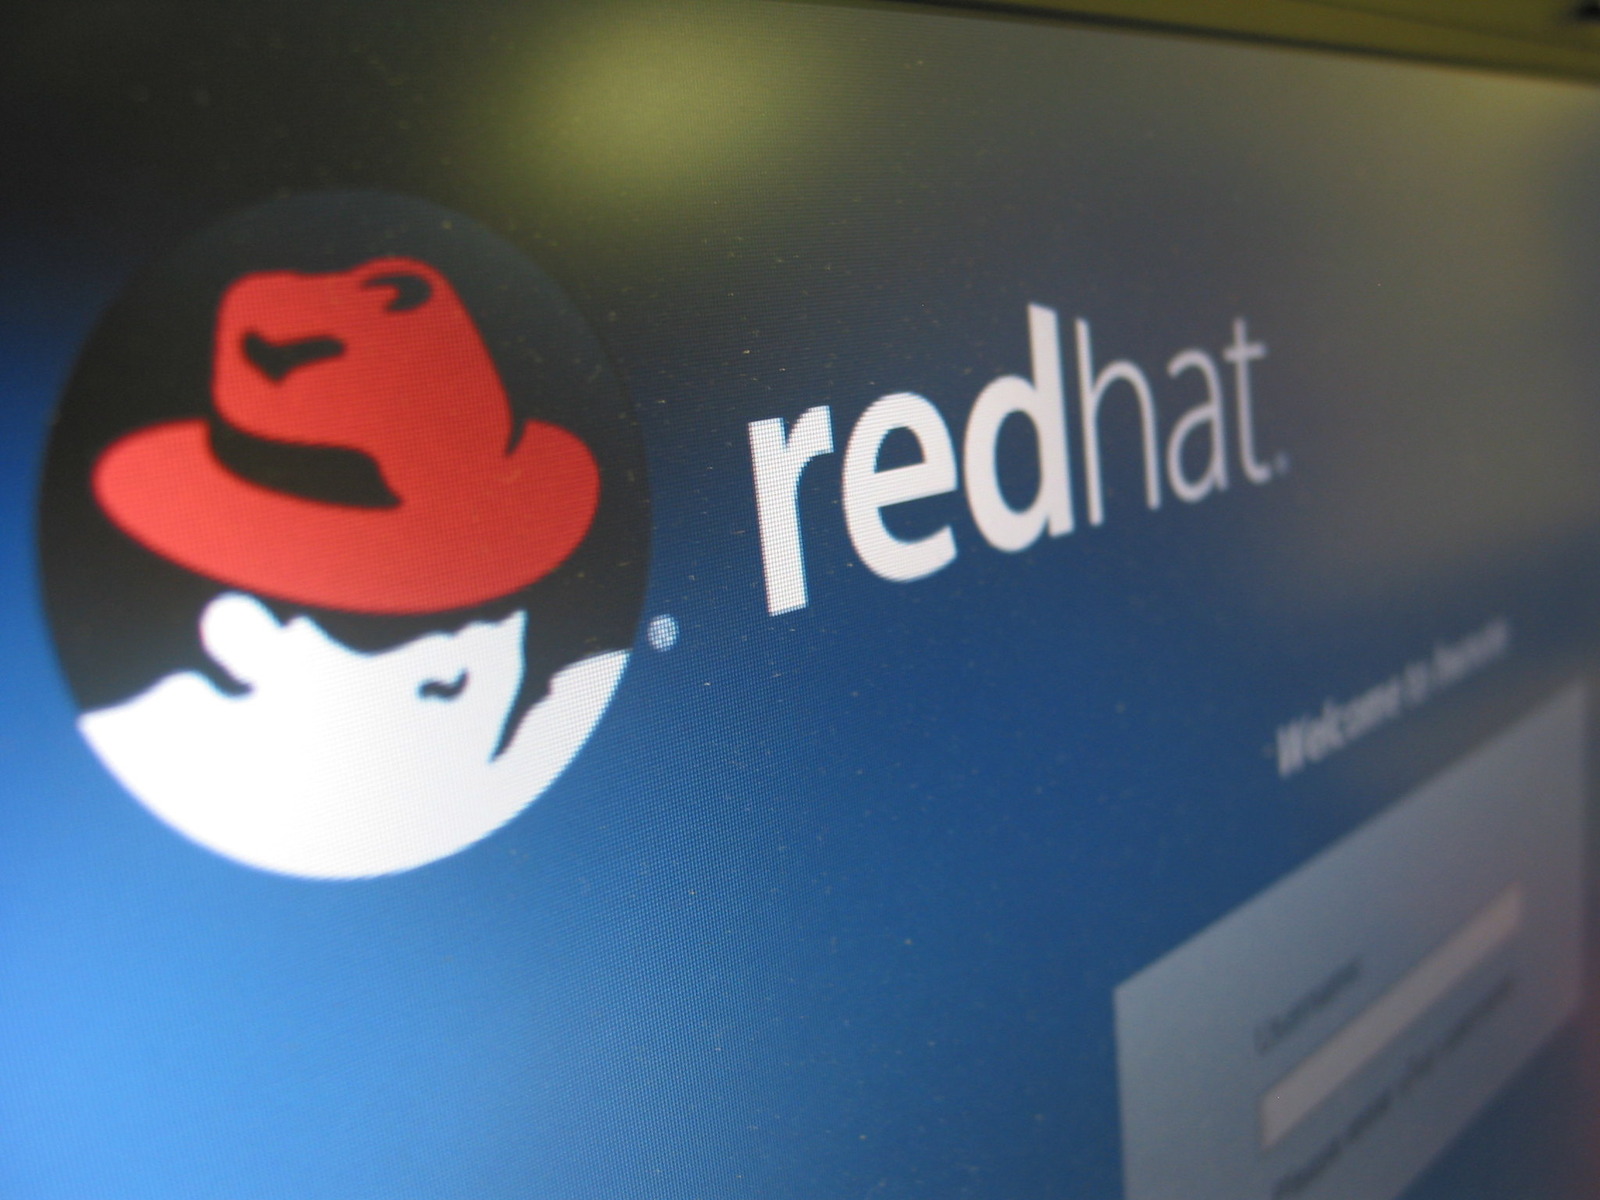 How To Determine If Red Hat Is Running As A Server Or Workstation